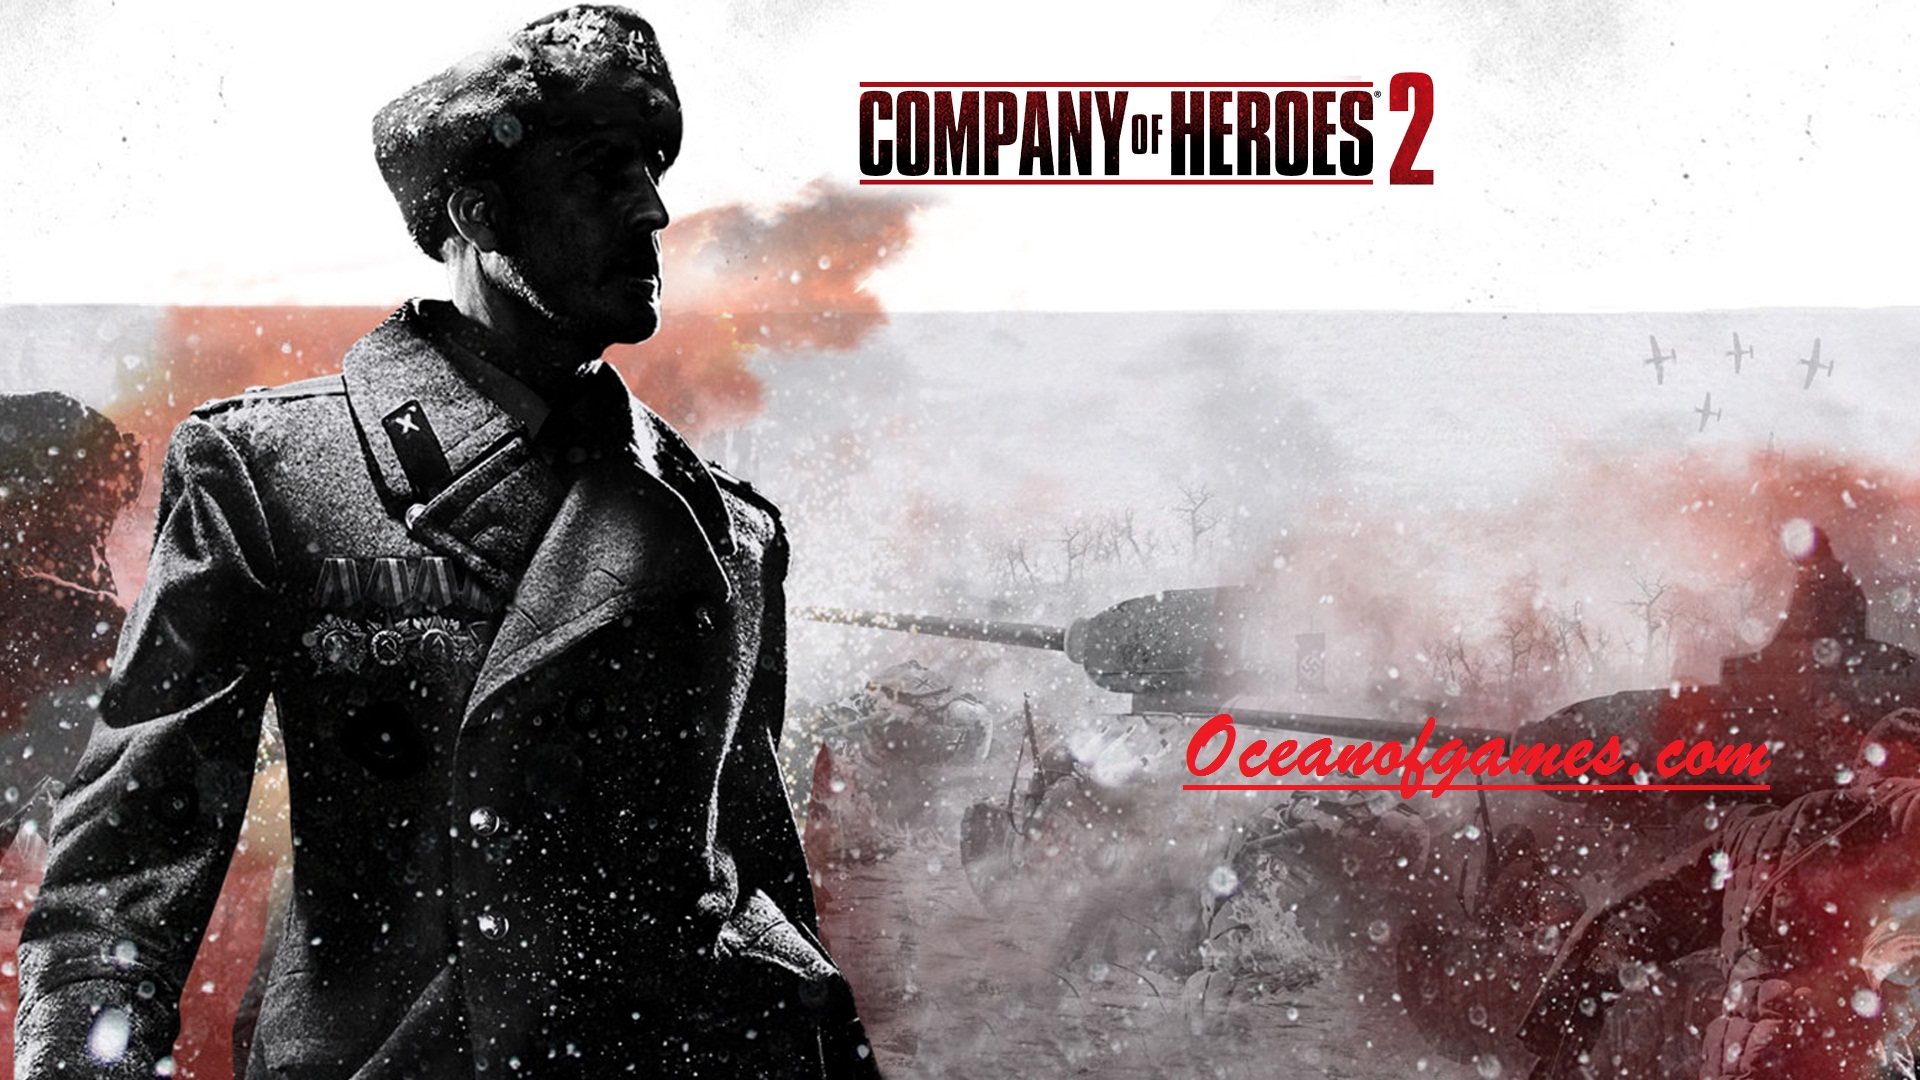 Company of Heroes 2 Free Download